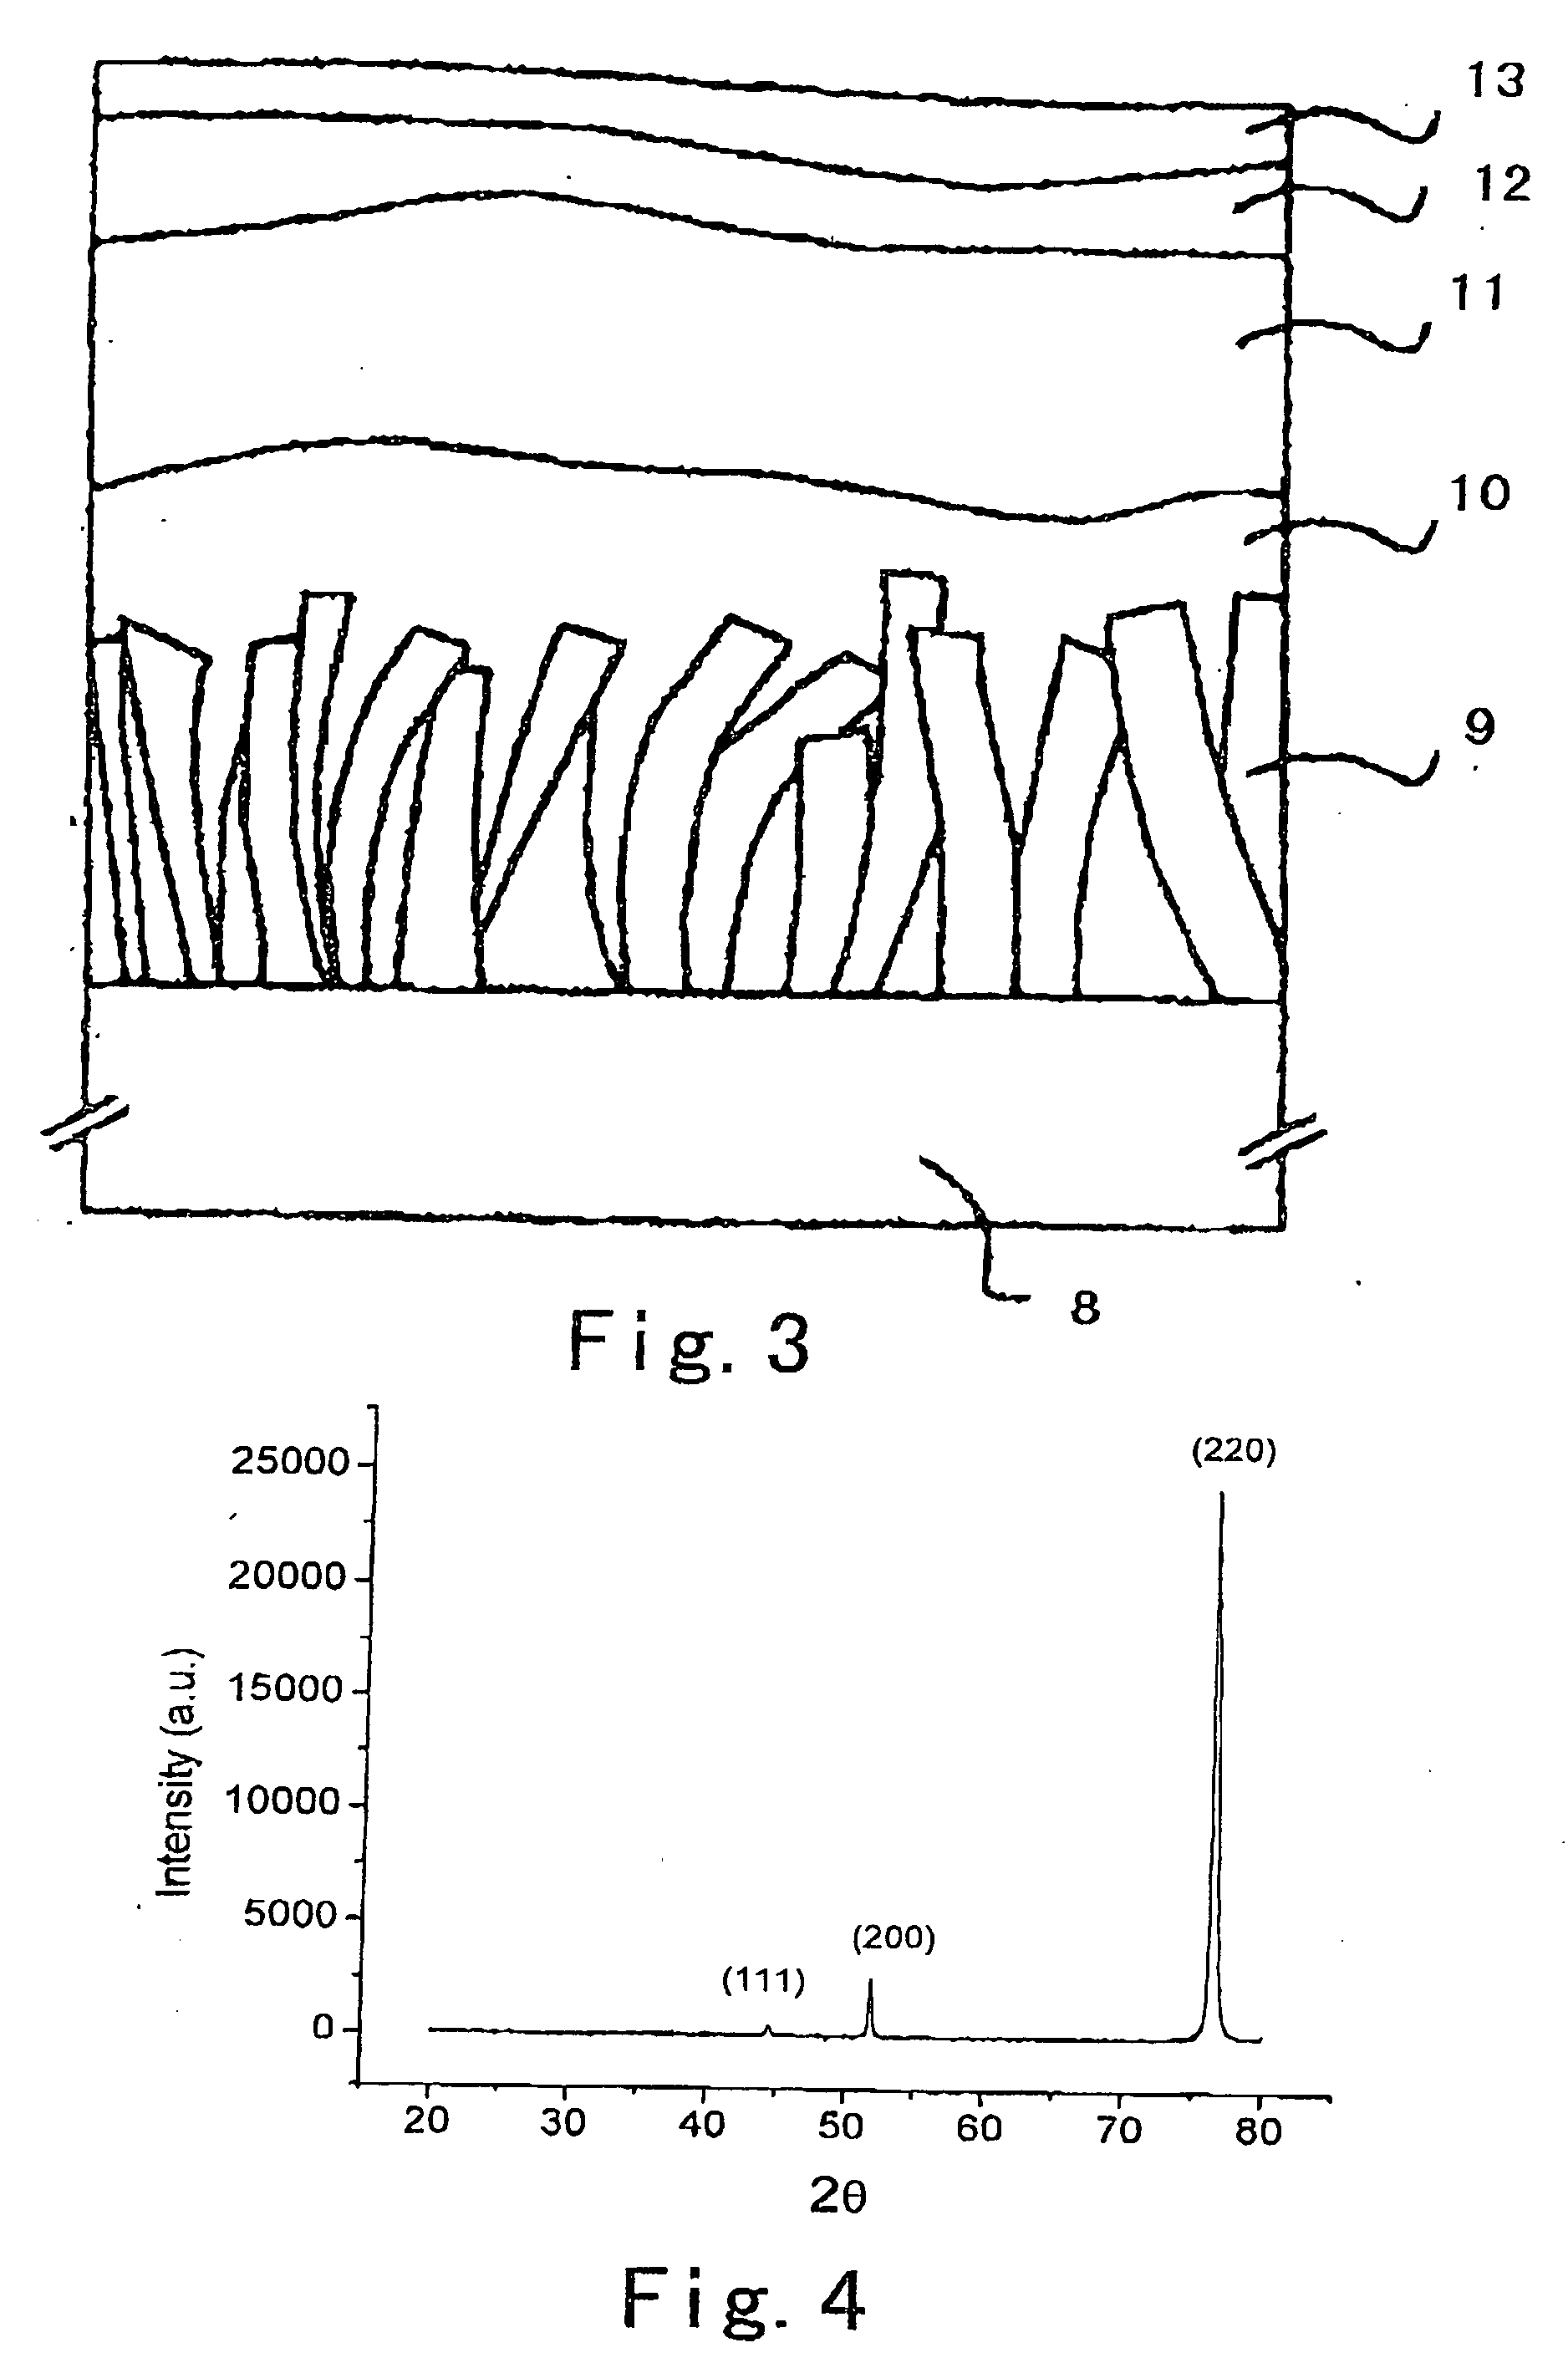 Surface improvement method in fabricating high temperature superconductor devices